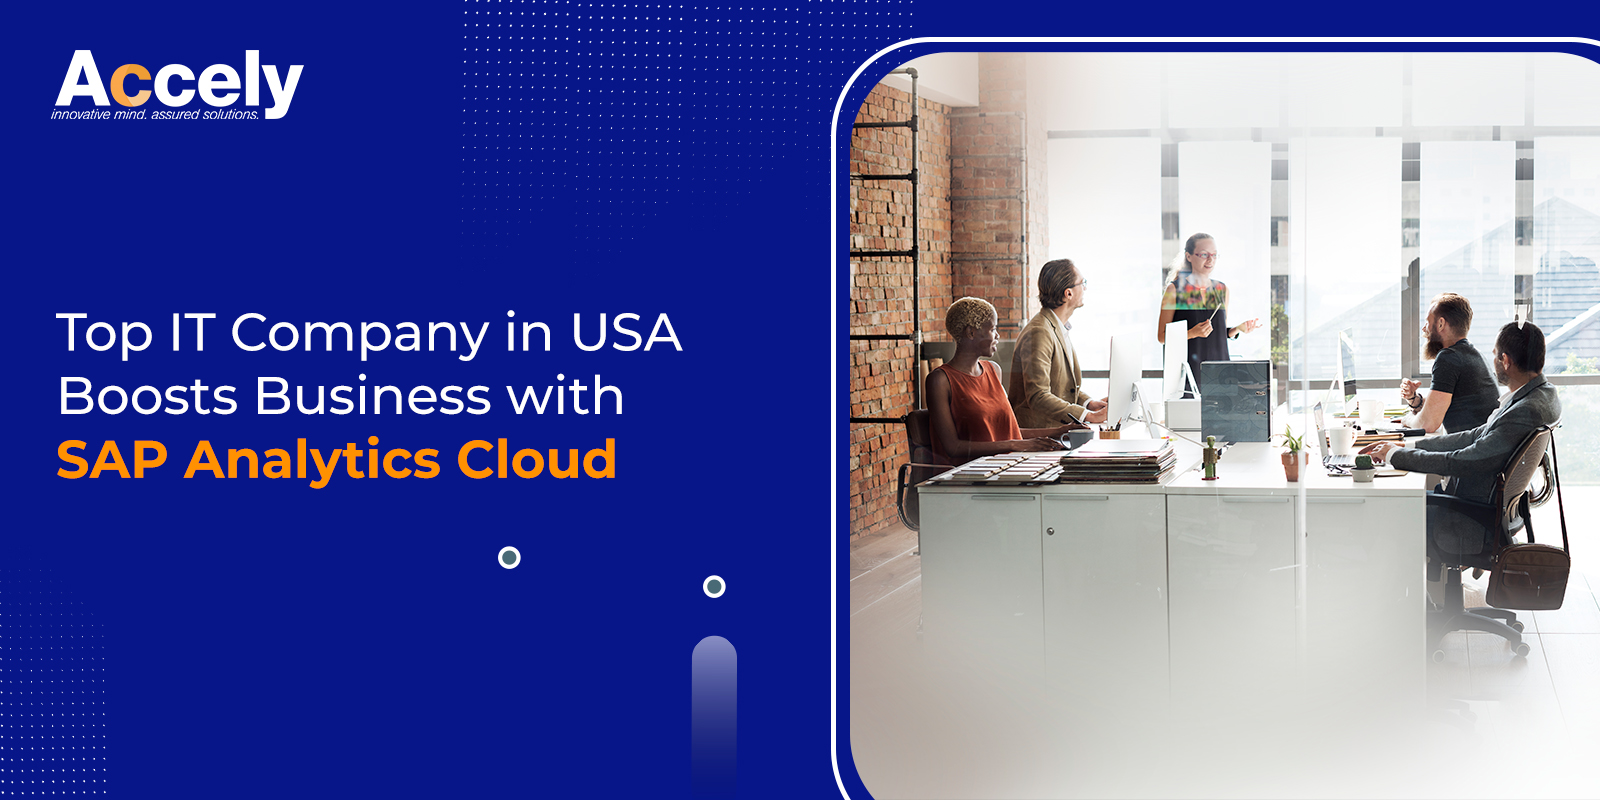 Top IT Company in USA Boosts Business with SAP Analytics Cloud